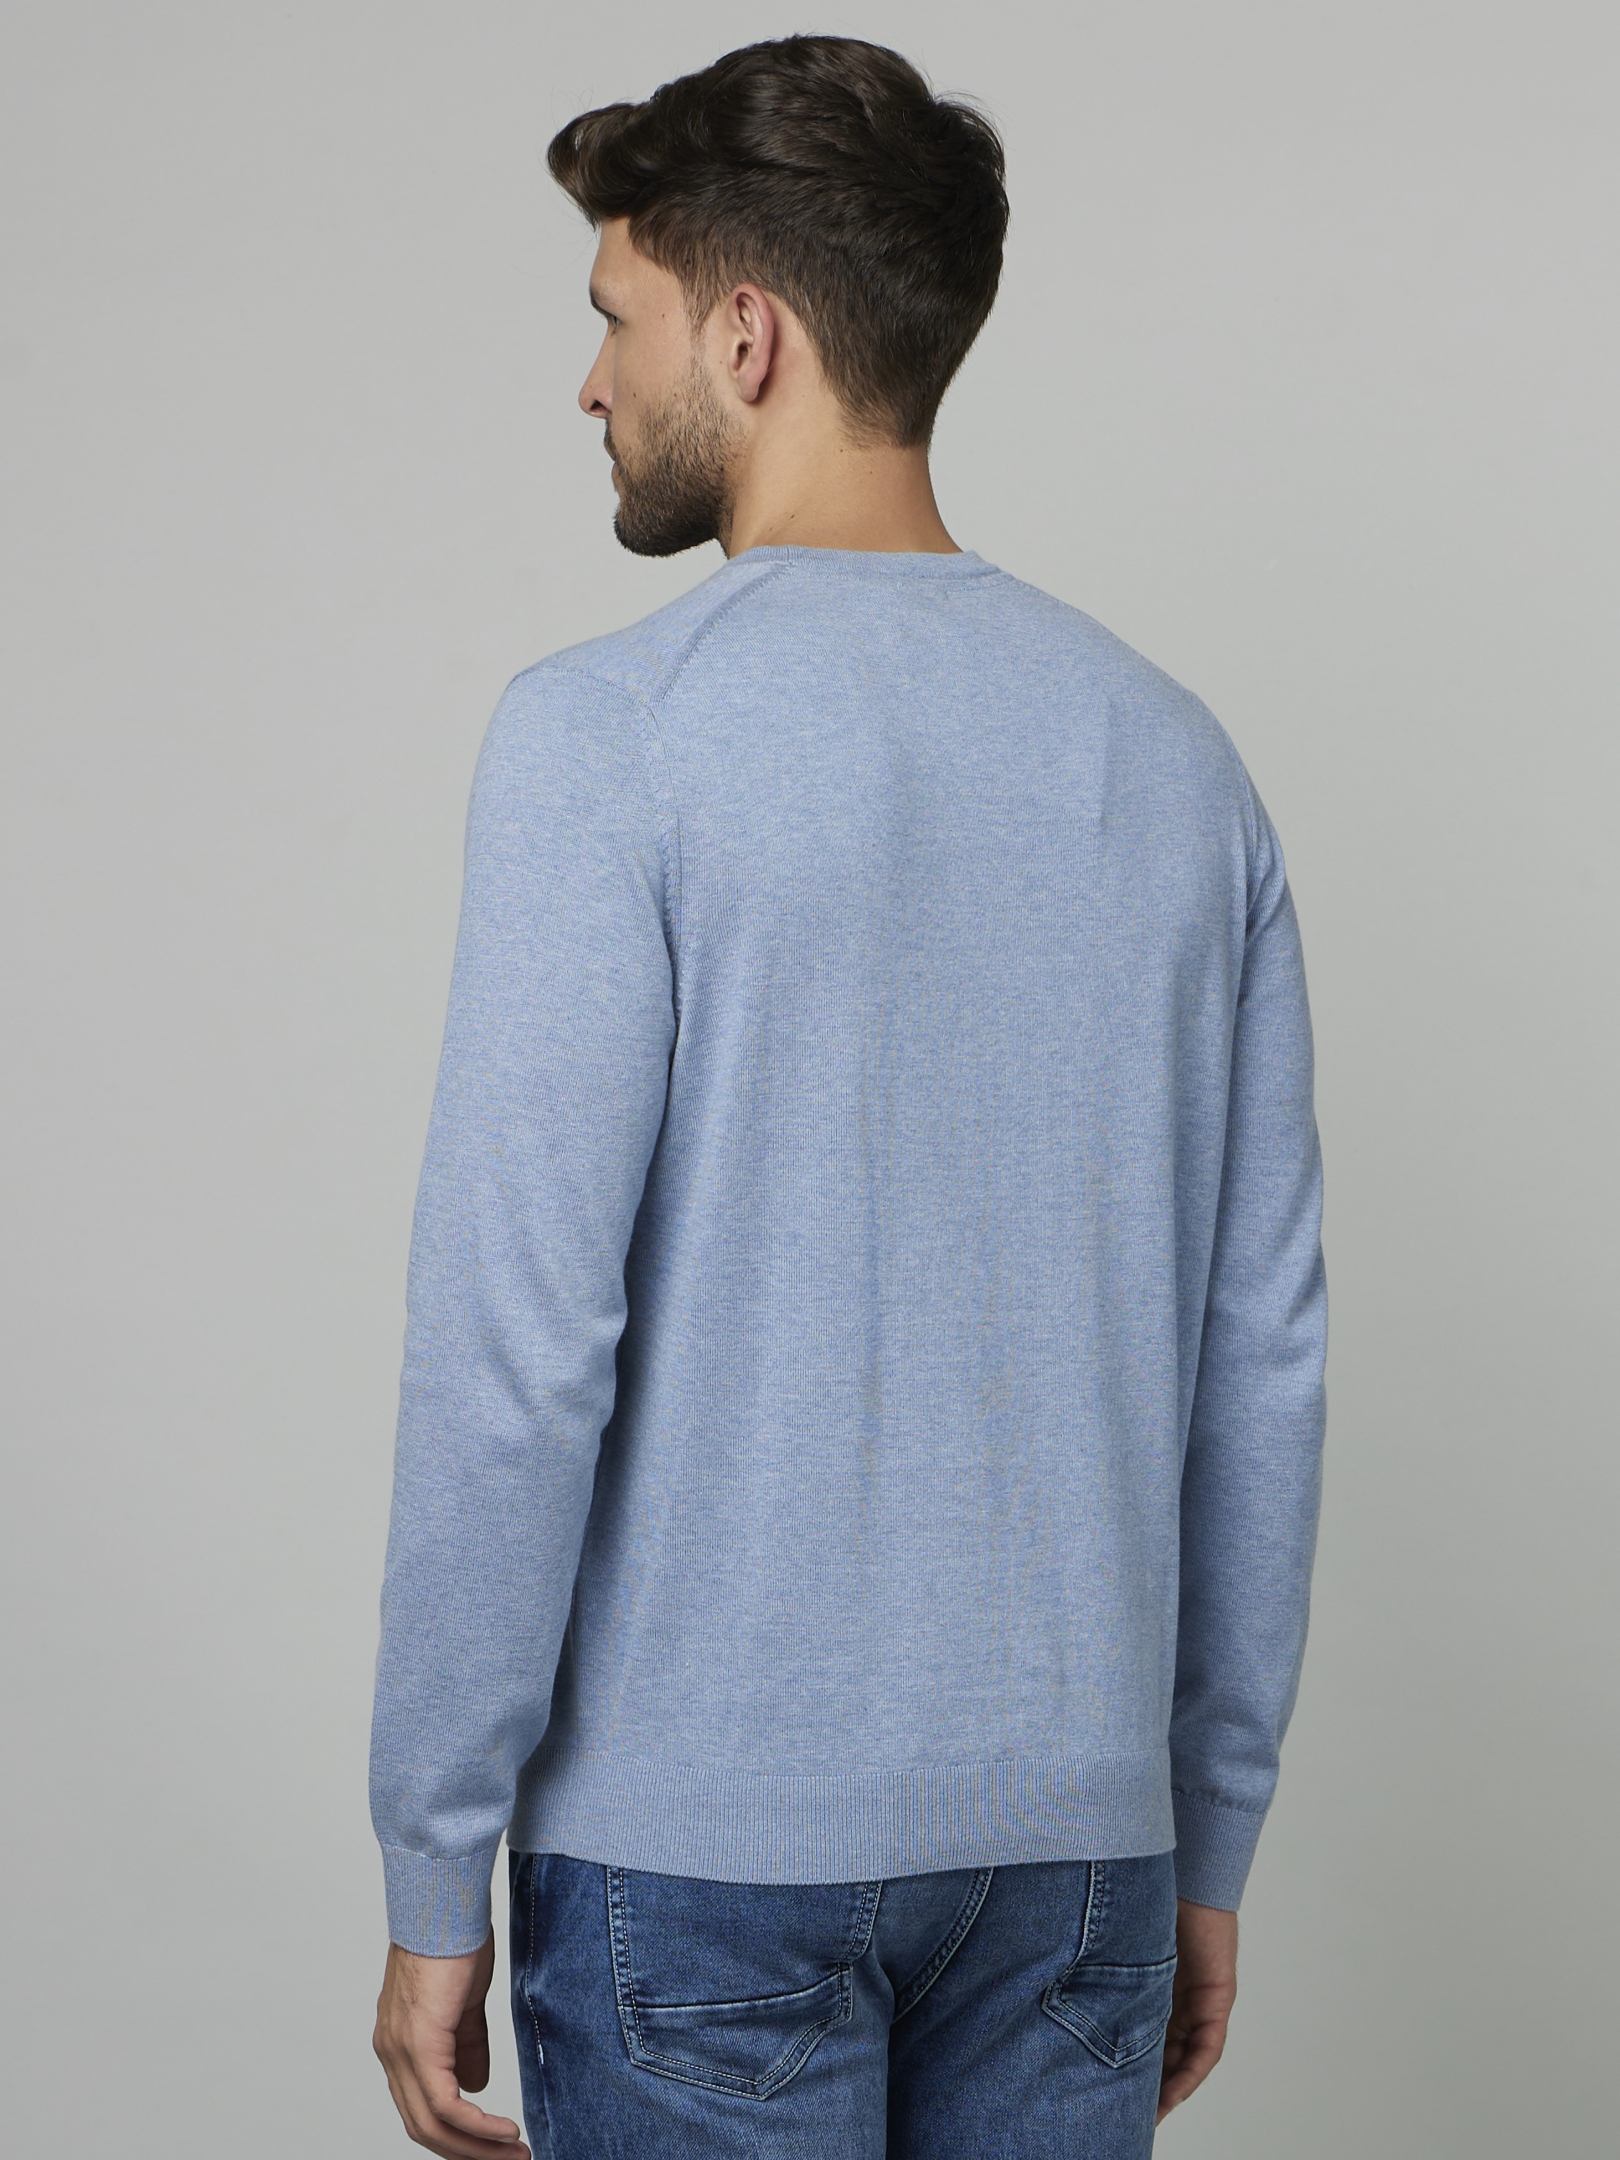 Men's Blue Solid Sweaters